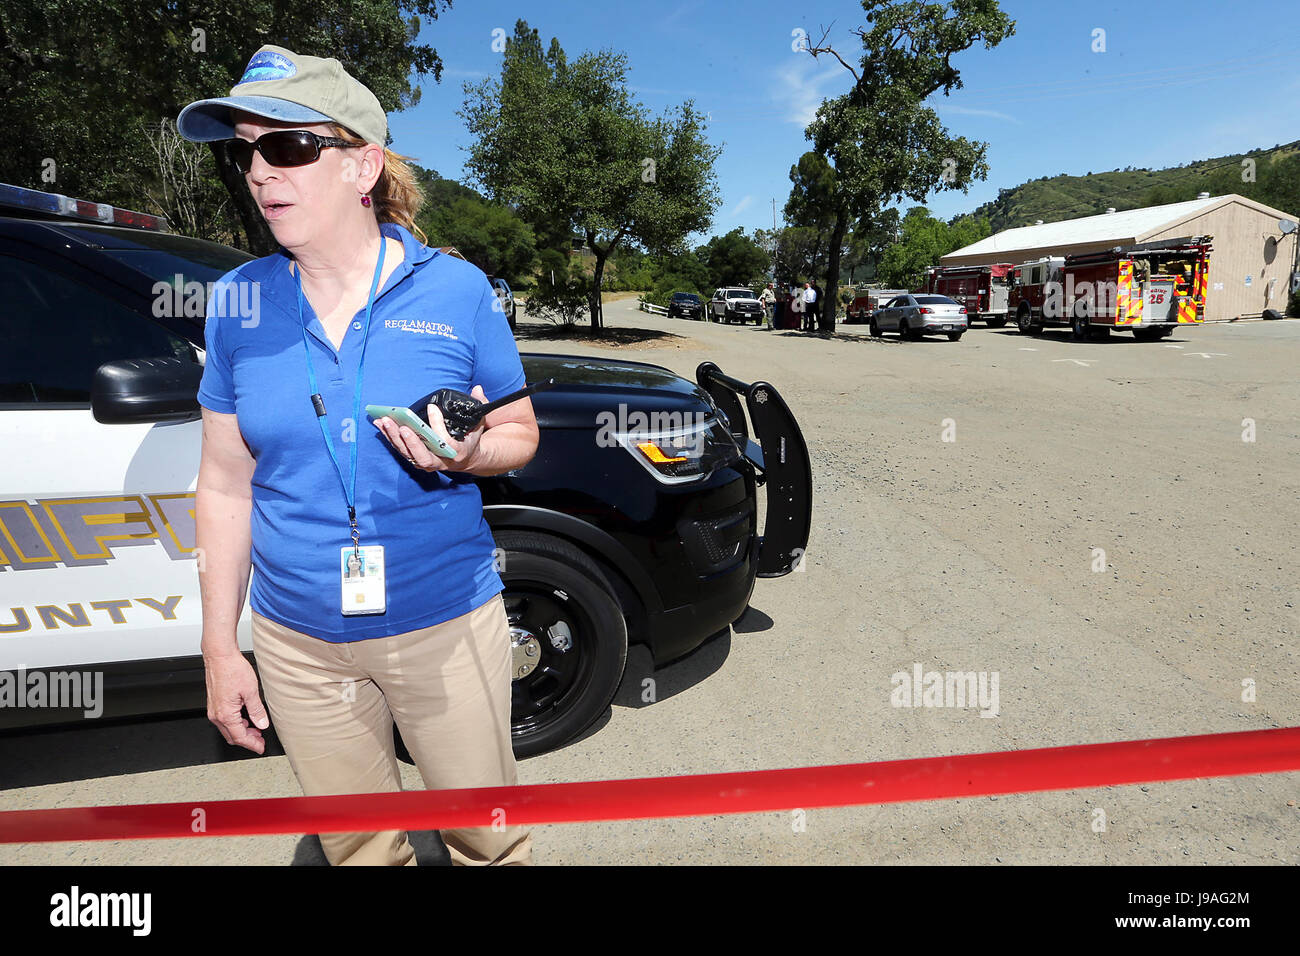 Lake Berryessa, CA, USA. 8th May, 2017. Margaret Bailey with the Bureau of Reclamation at the staging area where authorities were investigating a plane crash at Lake Berryessa on Monday. The crash occurred near Pleasure Cove Marina and Markley Cove Resort in an area of the lake that could only be reached by boat. Credit: Napa Valley Register/ZUMA Wire/Alamy Live News Stock Photo